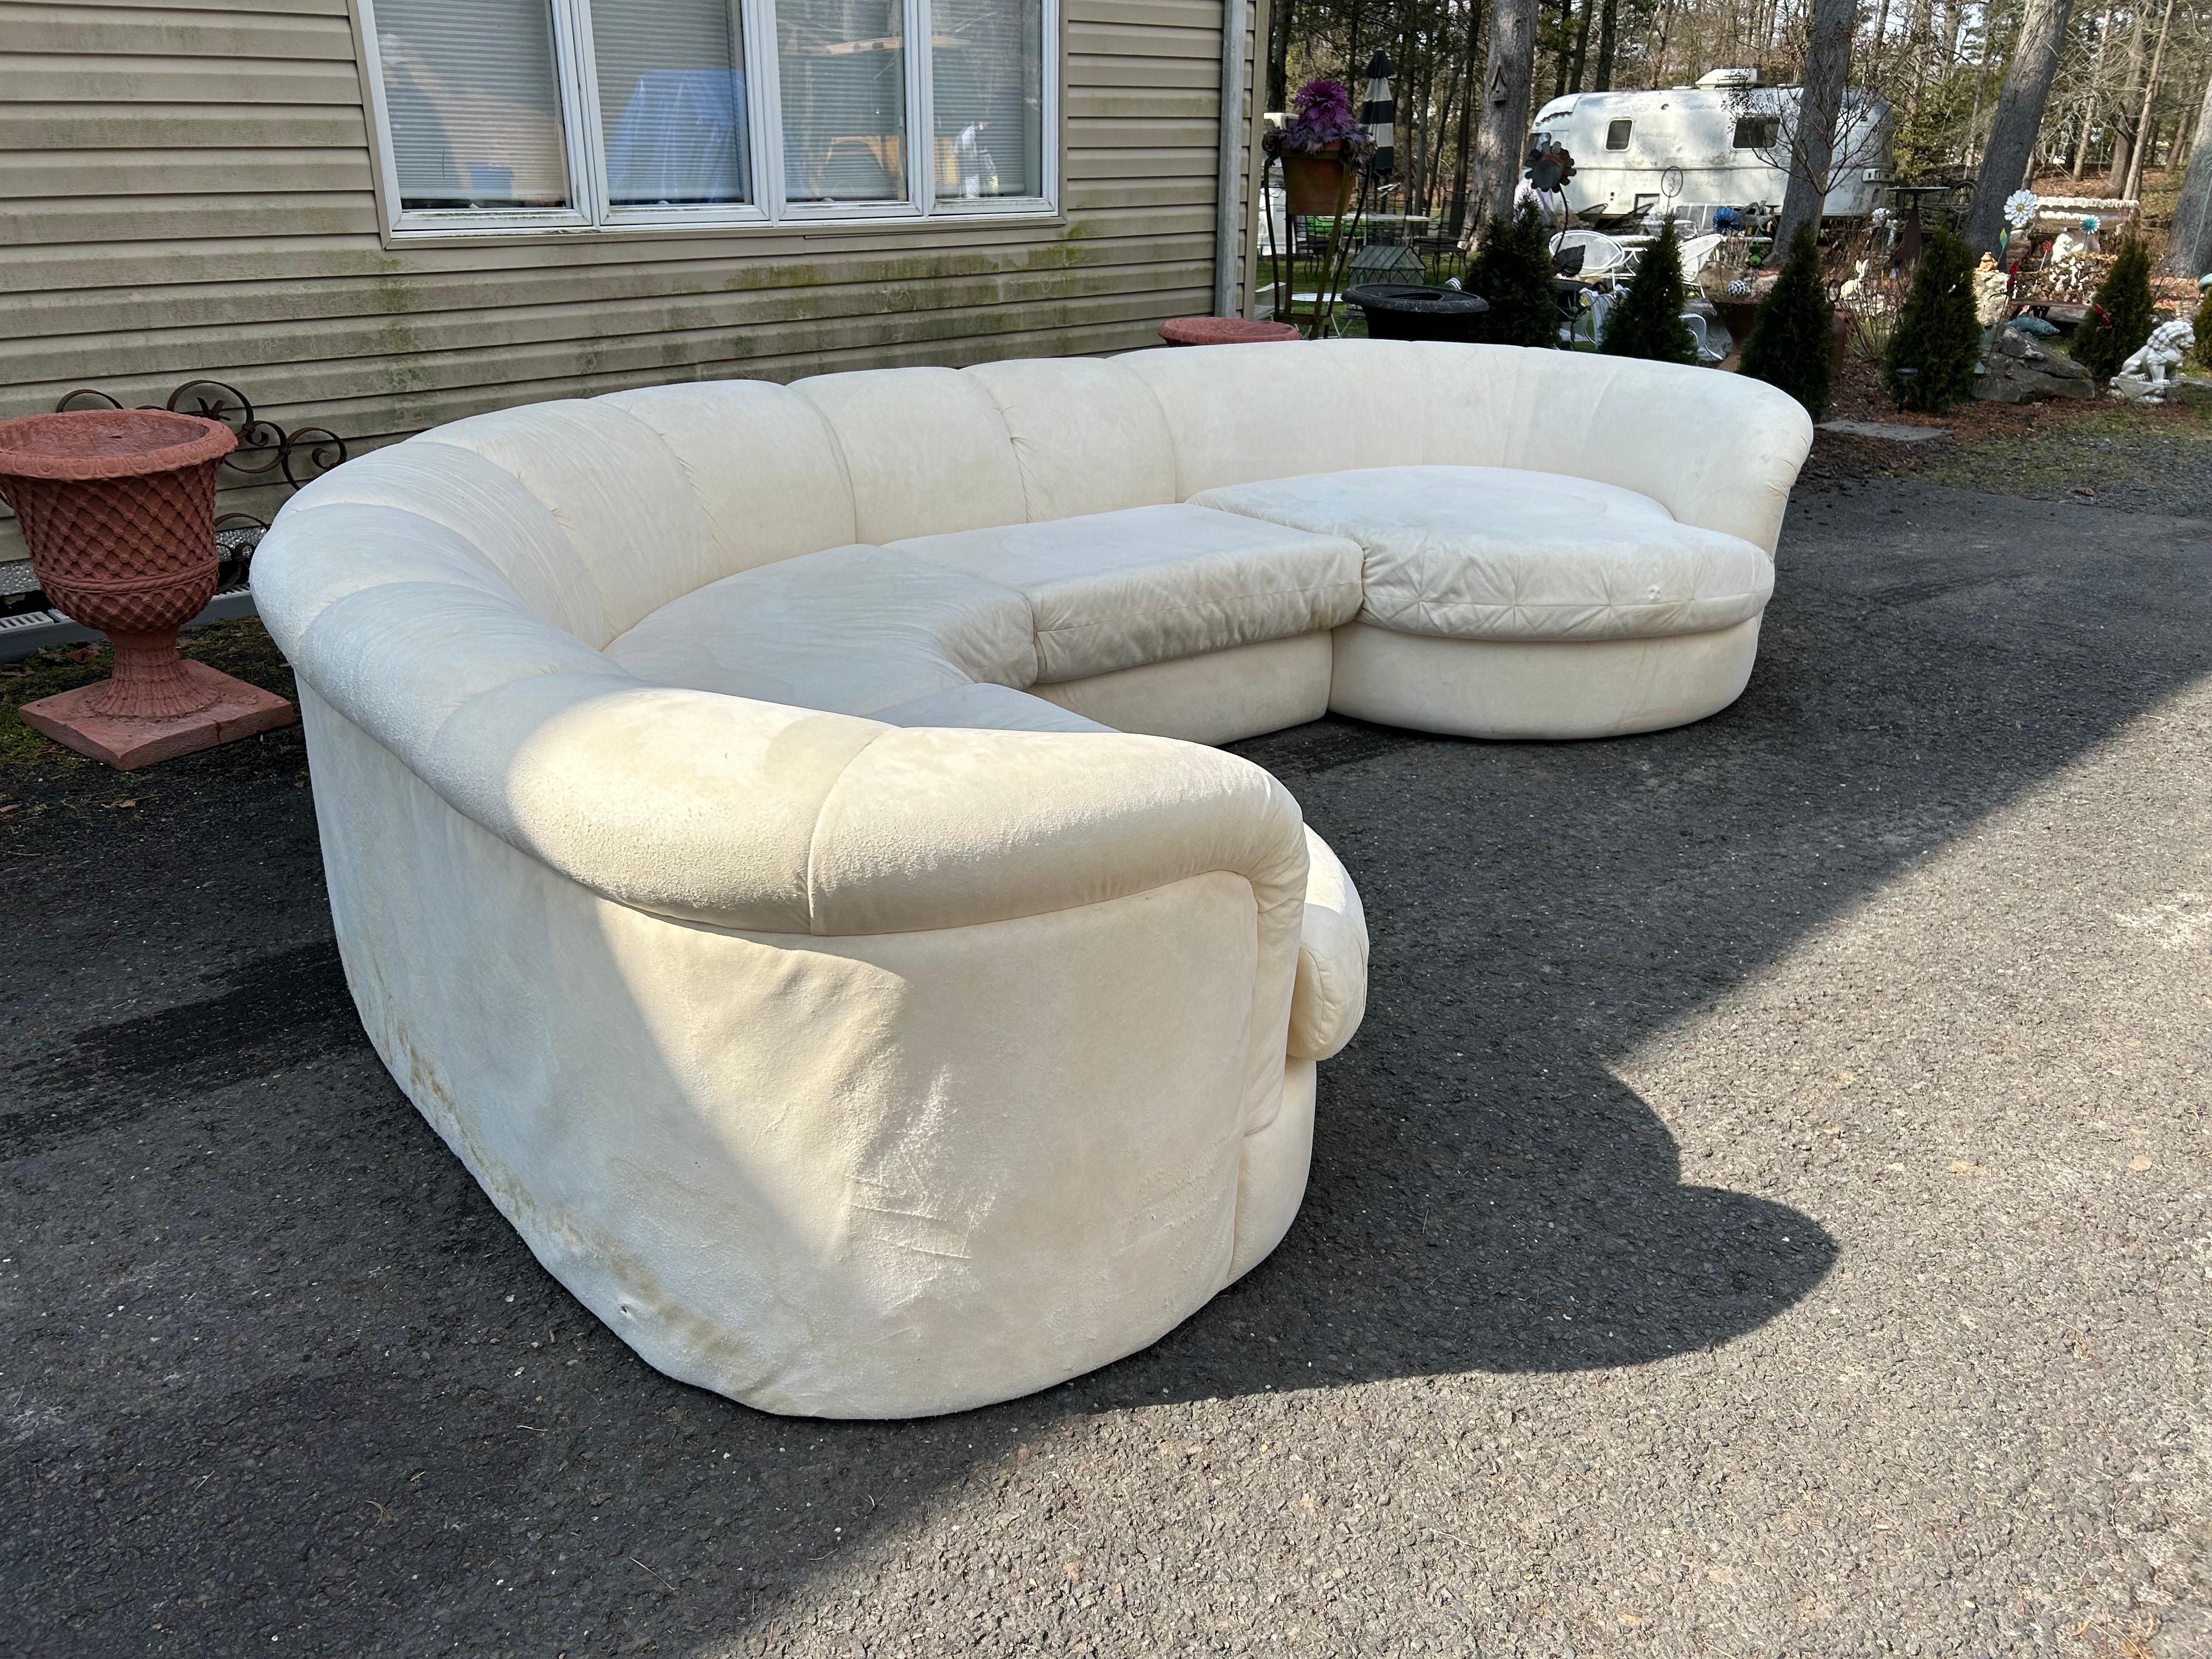 Wonderful 4 piece Milo Baughman style curved sectional sofa.  We love the oversized channeled back and arms along with the circular end pieces.  This sofa will need to be reupholstered as the original ultra-suede is well worn.  It measures 29